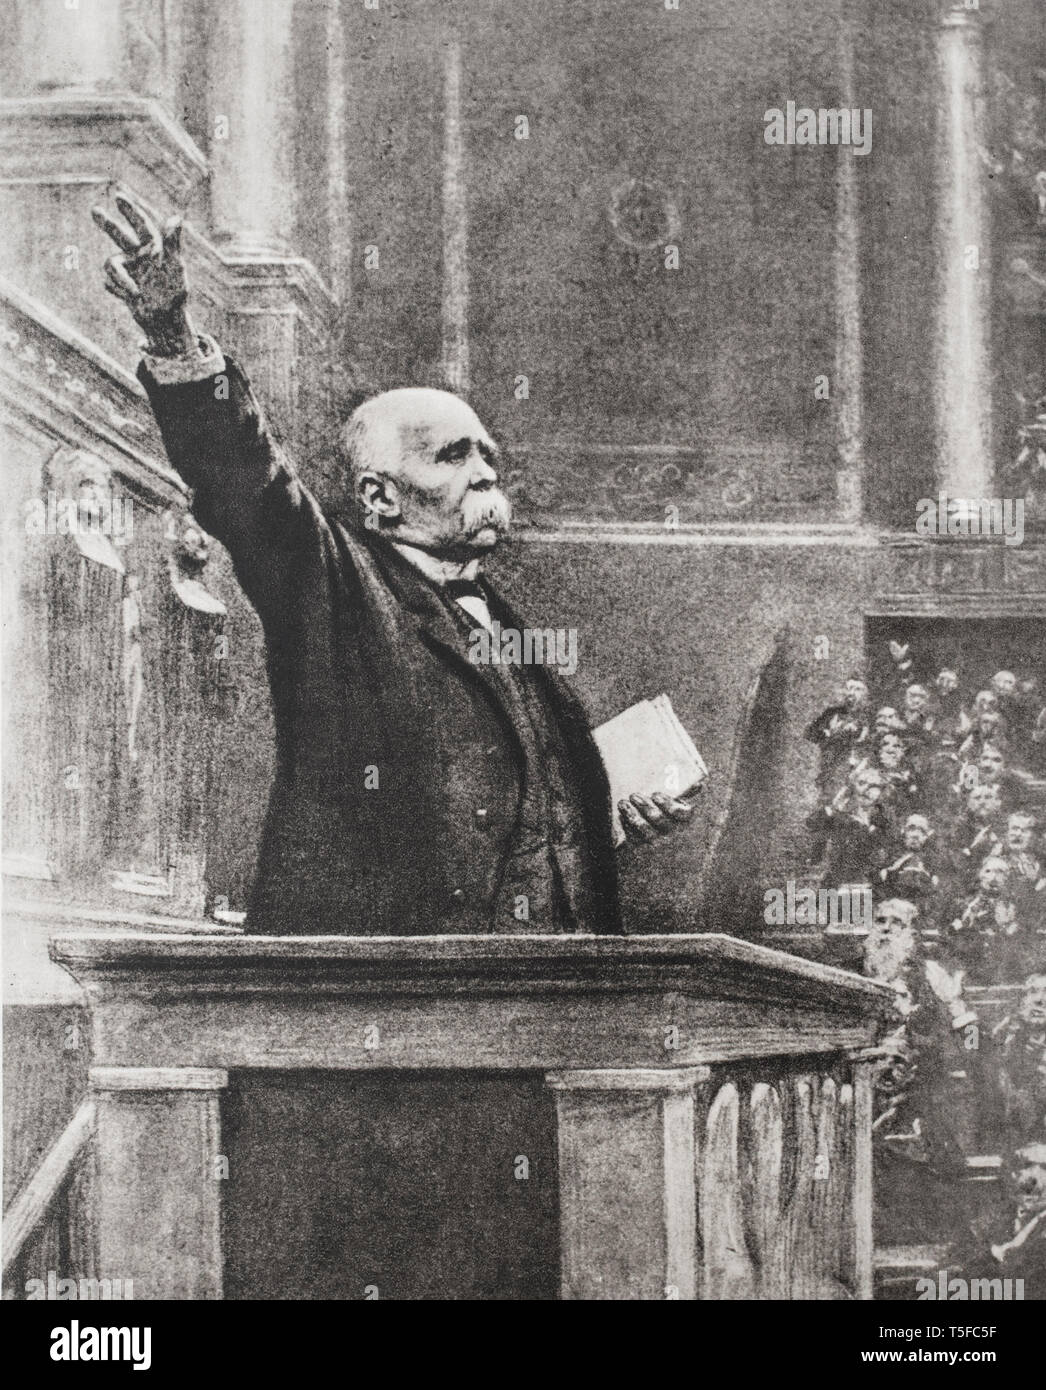 Georges Clemenceau, from the tribune of the Chamber of Deputies, proclaims the defeat of Germany and at the victory of allies Clemenceau (1841 – 1929) Stock Photo